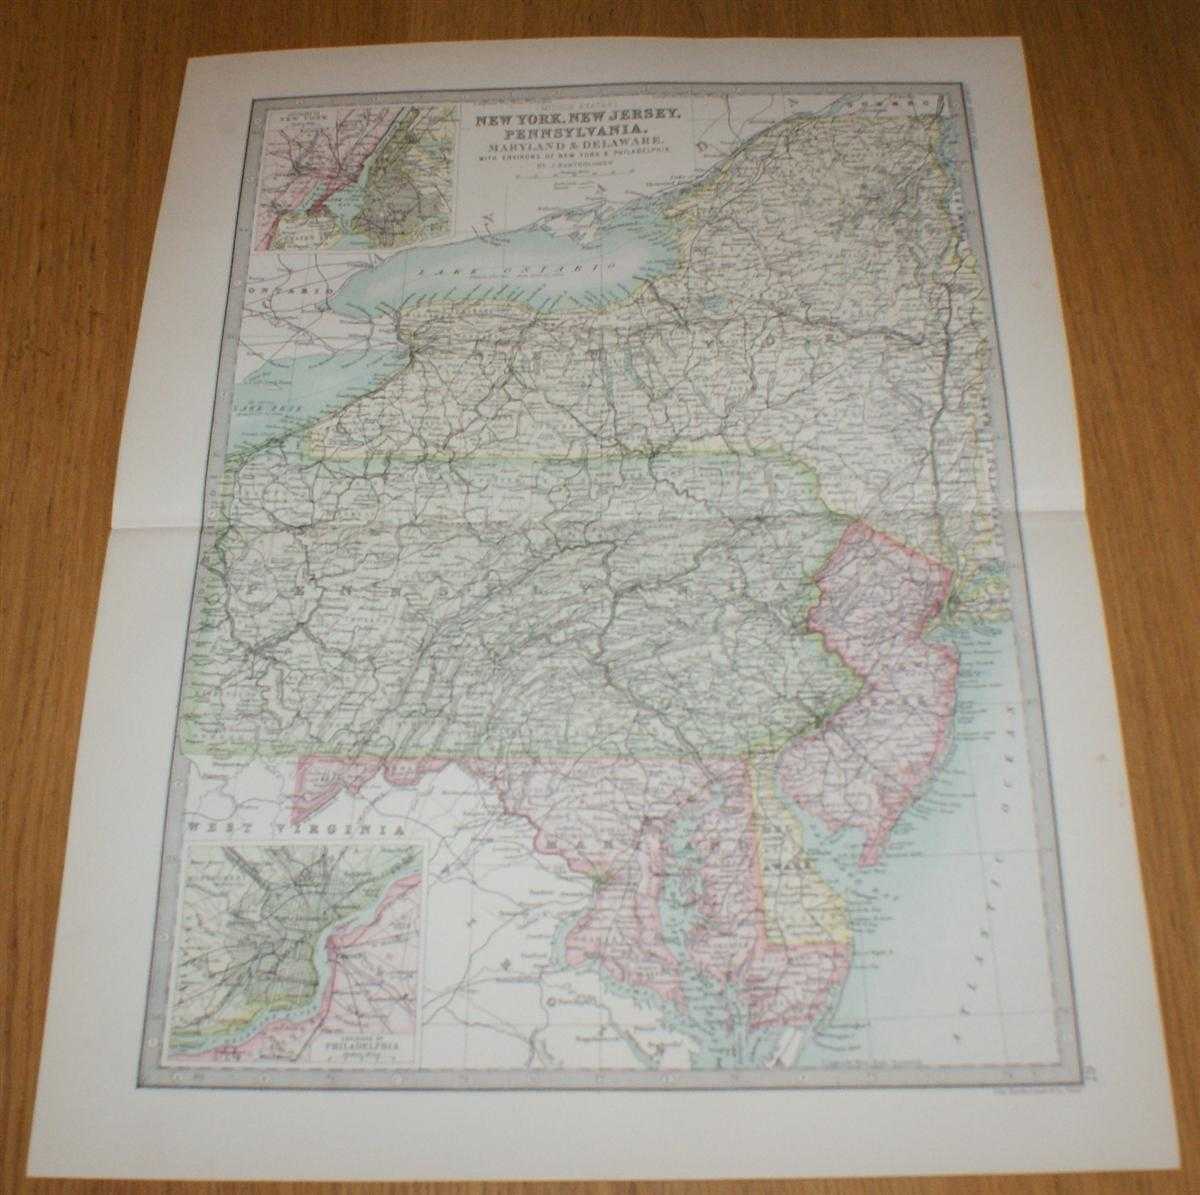 John Bartholomew - Map of New York, New Jersey, Pennsylvania, Maryland and Delaware with inset plans showing Environs of New York and Philadelphia - Sheet 67, Middle States of USA, disbound from the 1890 'The Library Reference Atlas of the World'